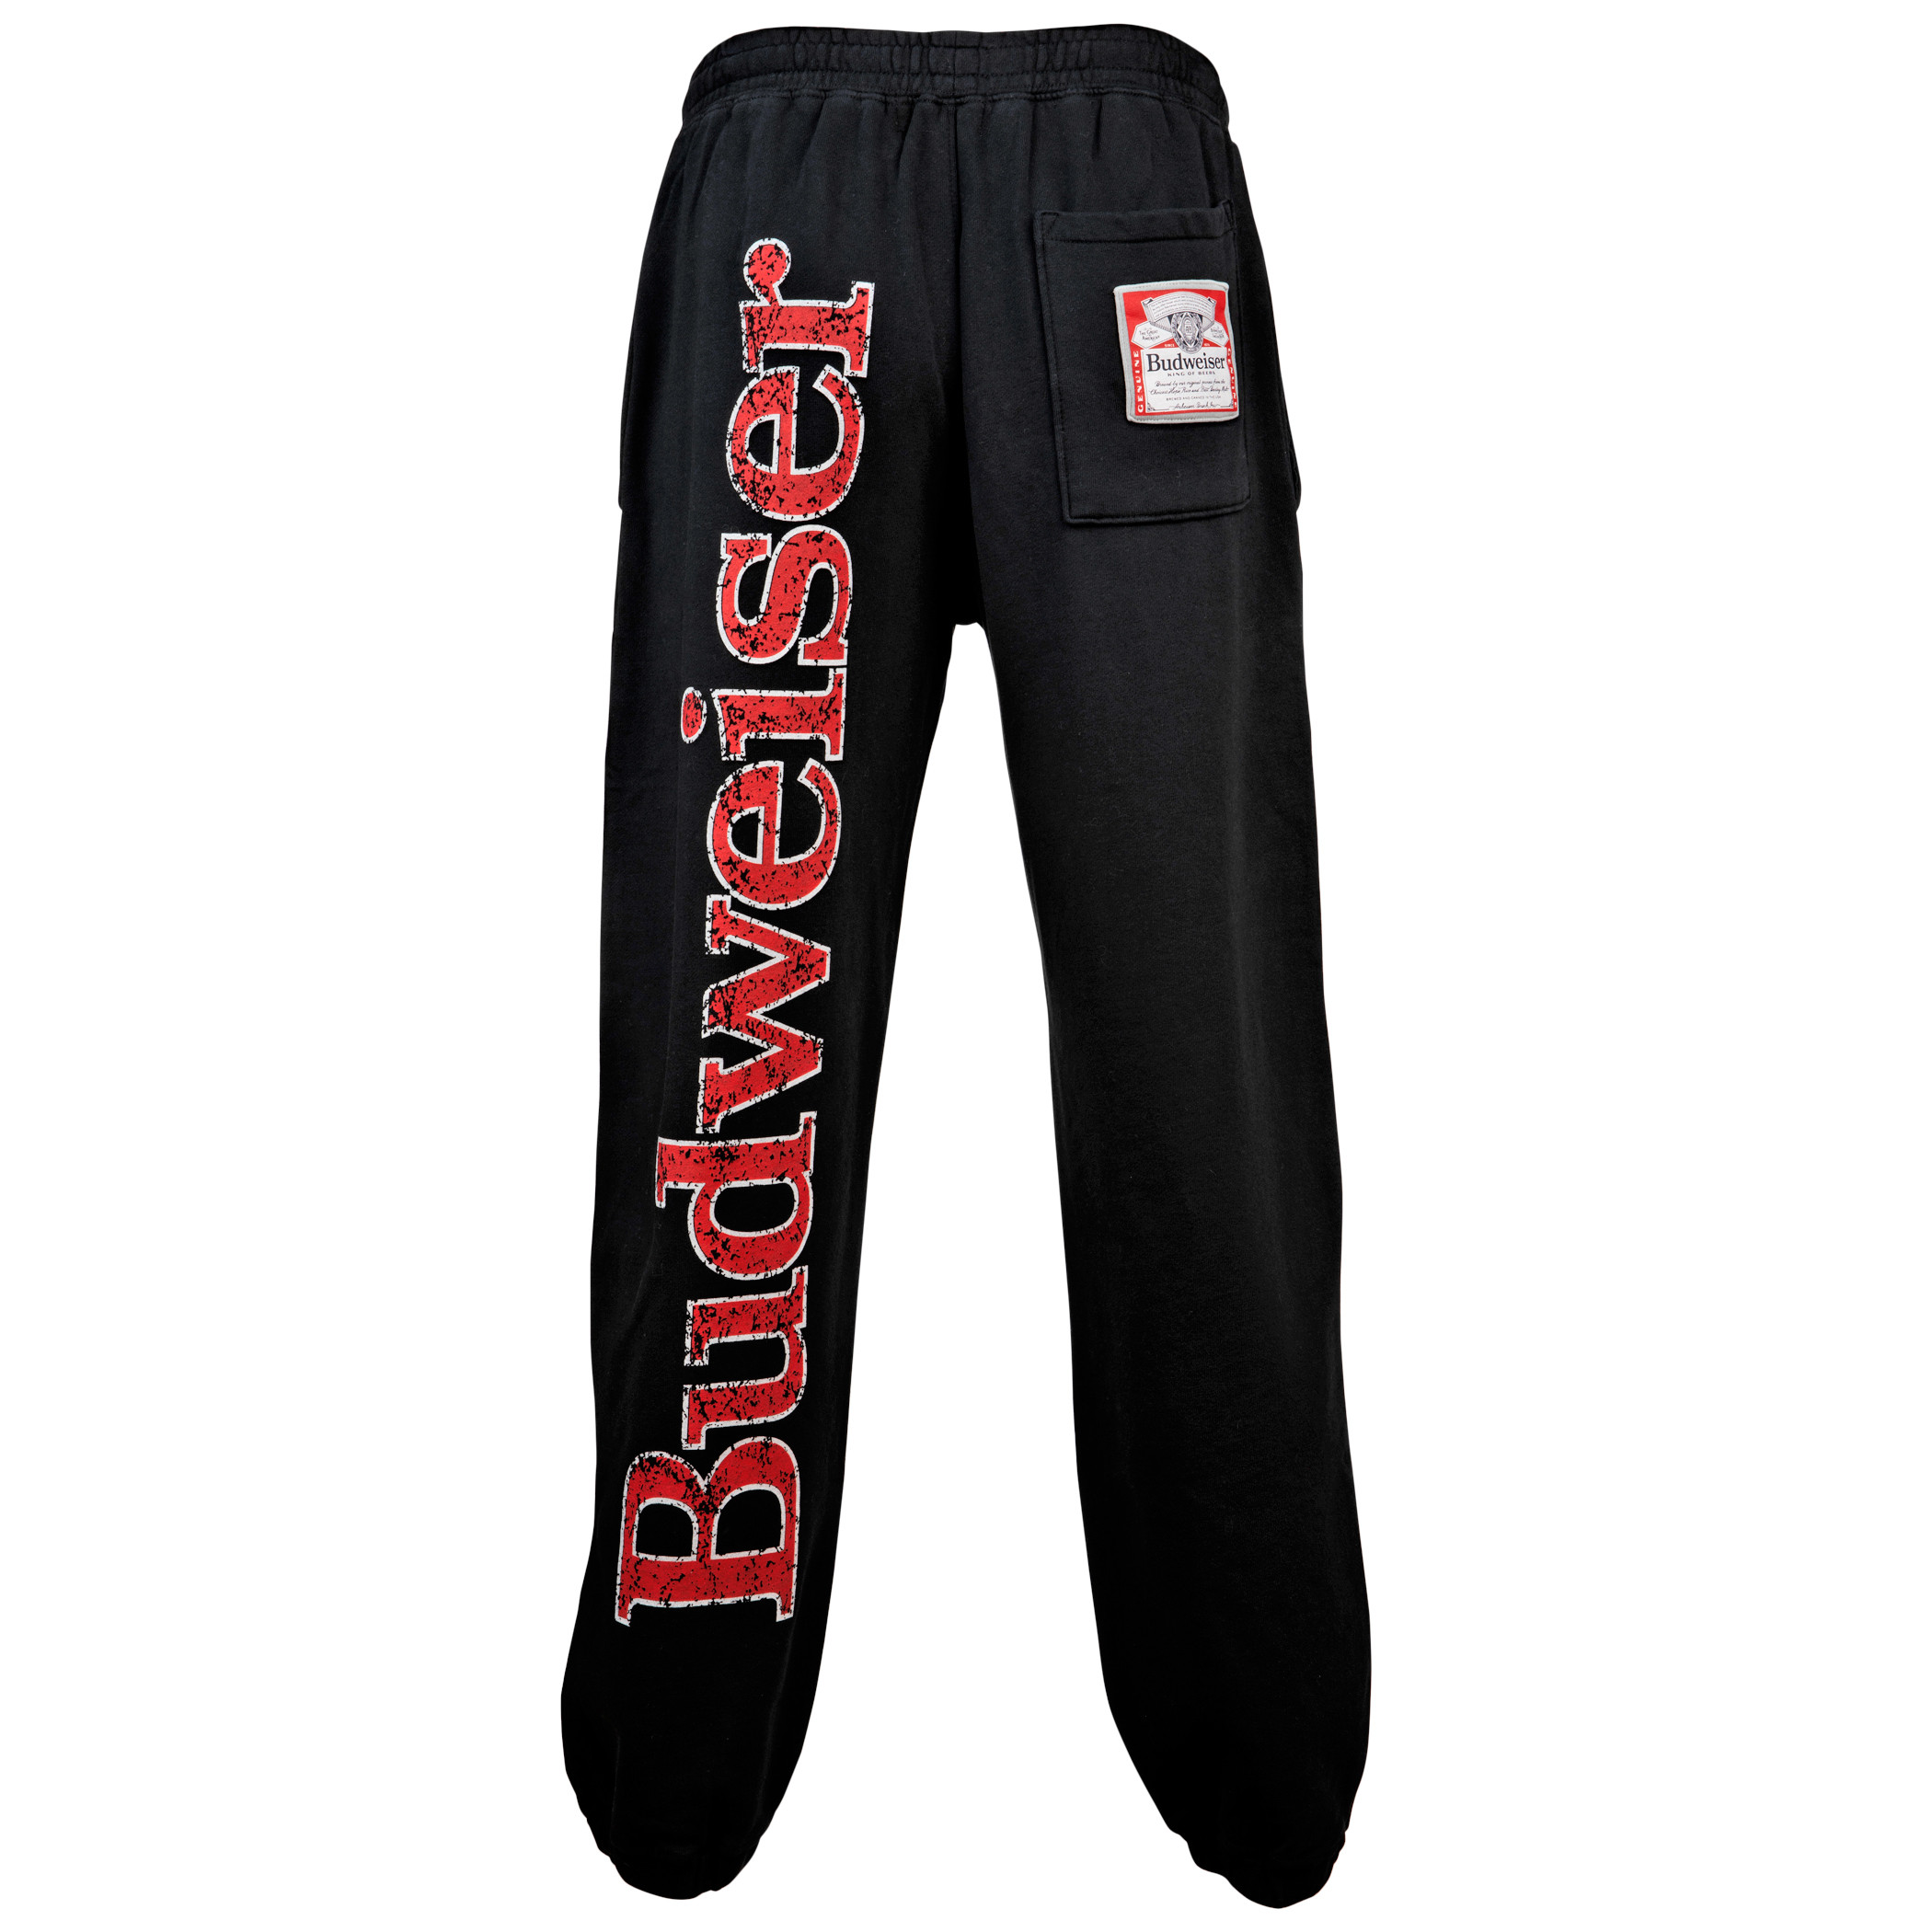 Budweiser Text and Label Patch Fleece Sweatpant Joggers